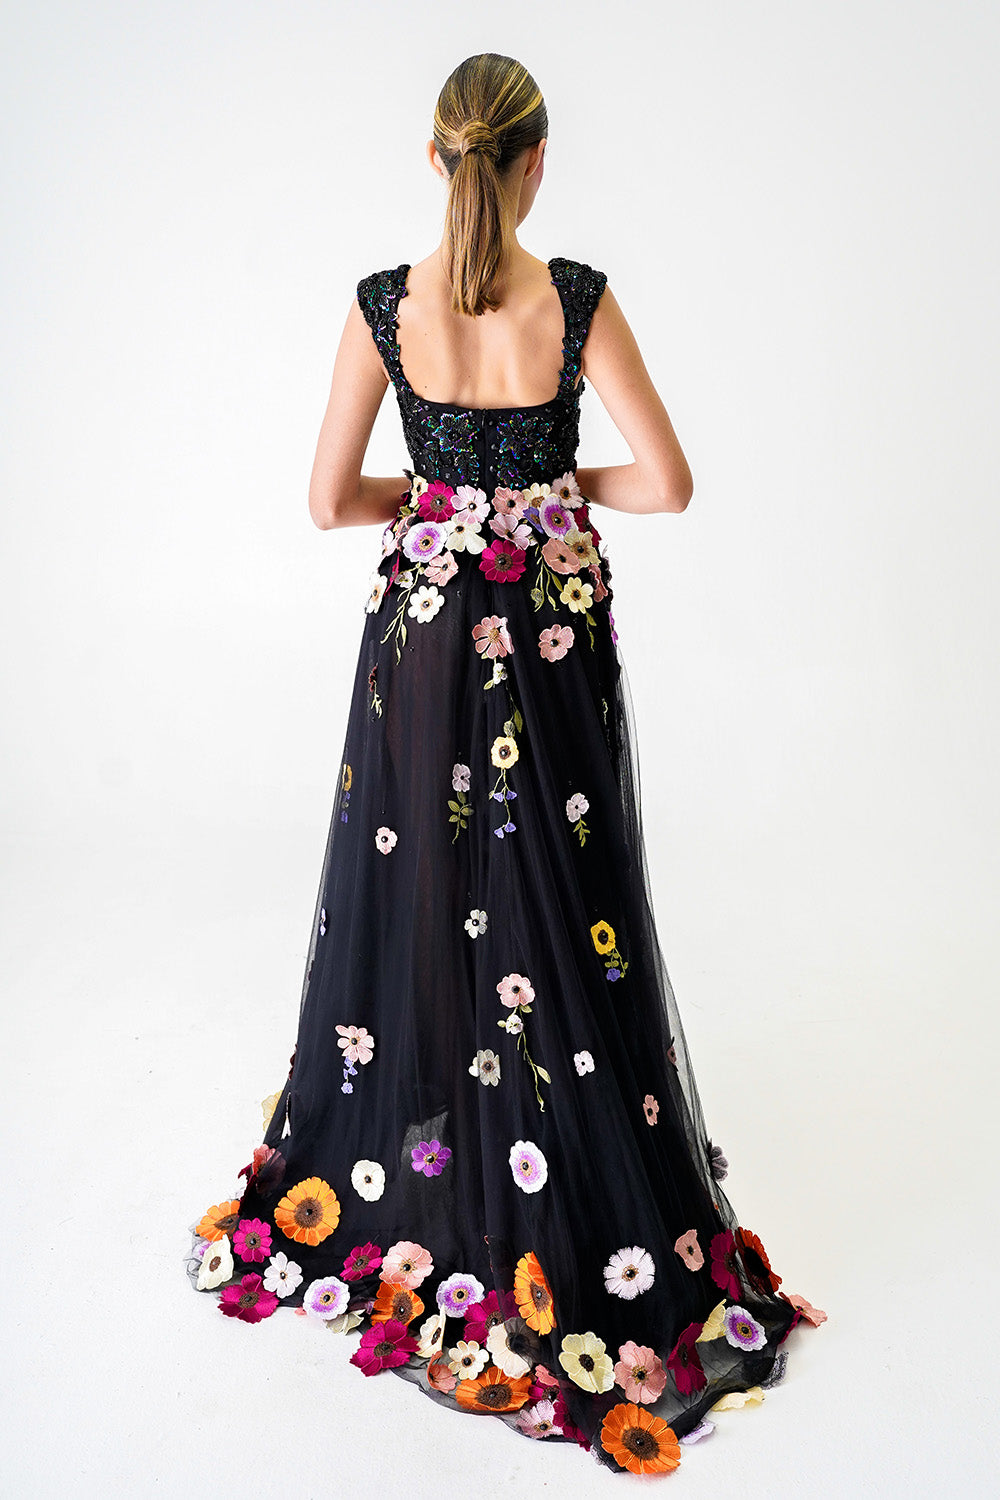 Black Floral Gown, Floral Maxi Dress, Black Wedding Dress, Prom Dress,  Embroidered Dress, Strapless, Spring Wedding, Black Tie Gown - Etsy